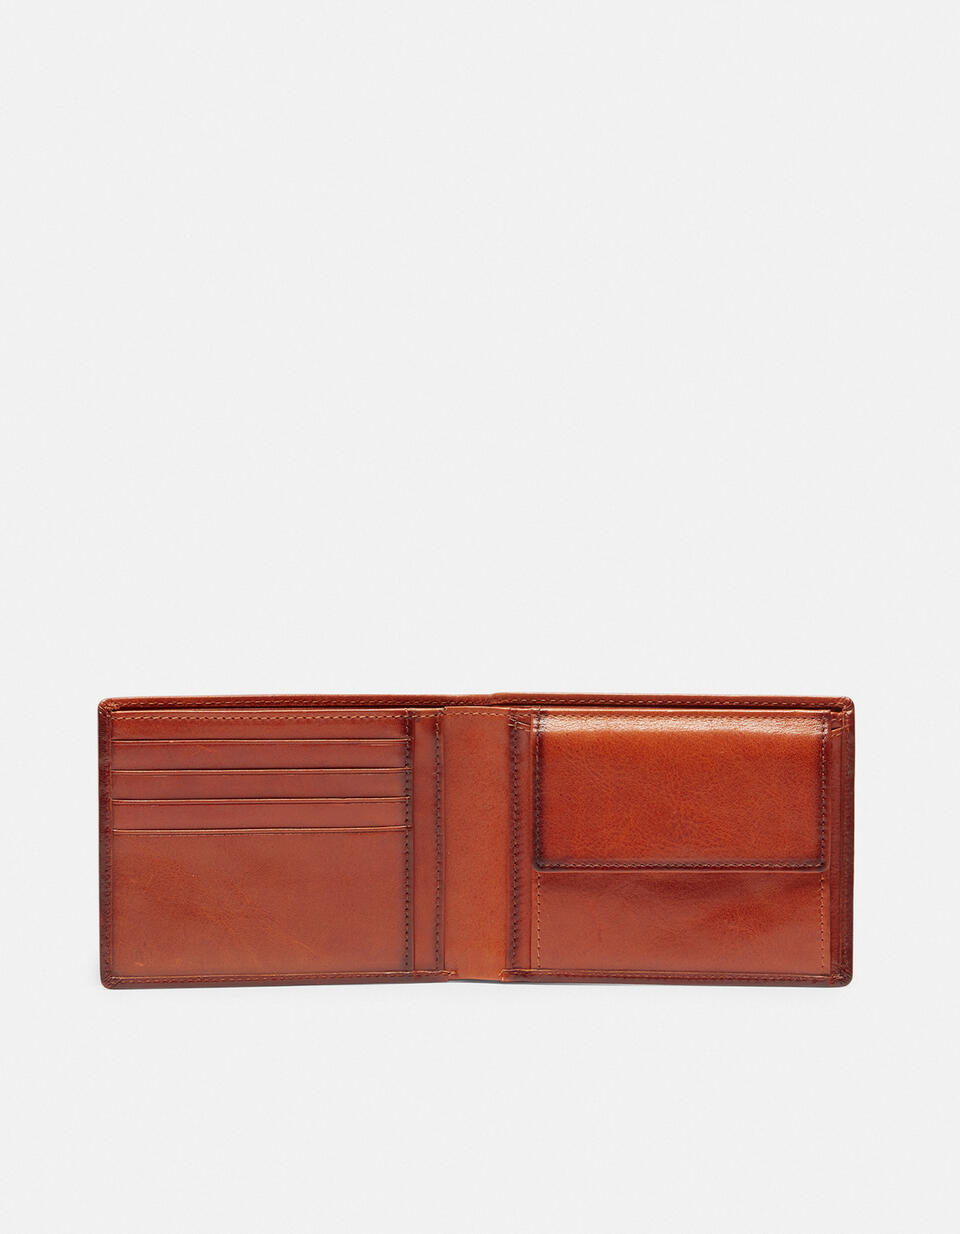 Anti-rfid Warm and Color wallet with leather coin case - Women's Wallets - Men's Wallets | Wallets ARANCIO - Women's Wallets - Men's Wallets | WalletsCuoieria Fiorentina